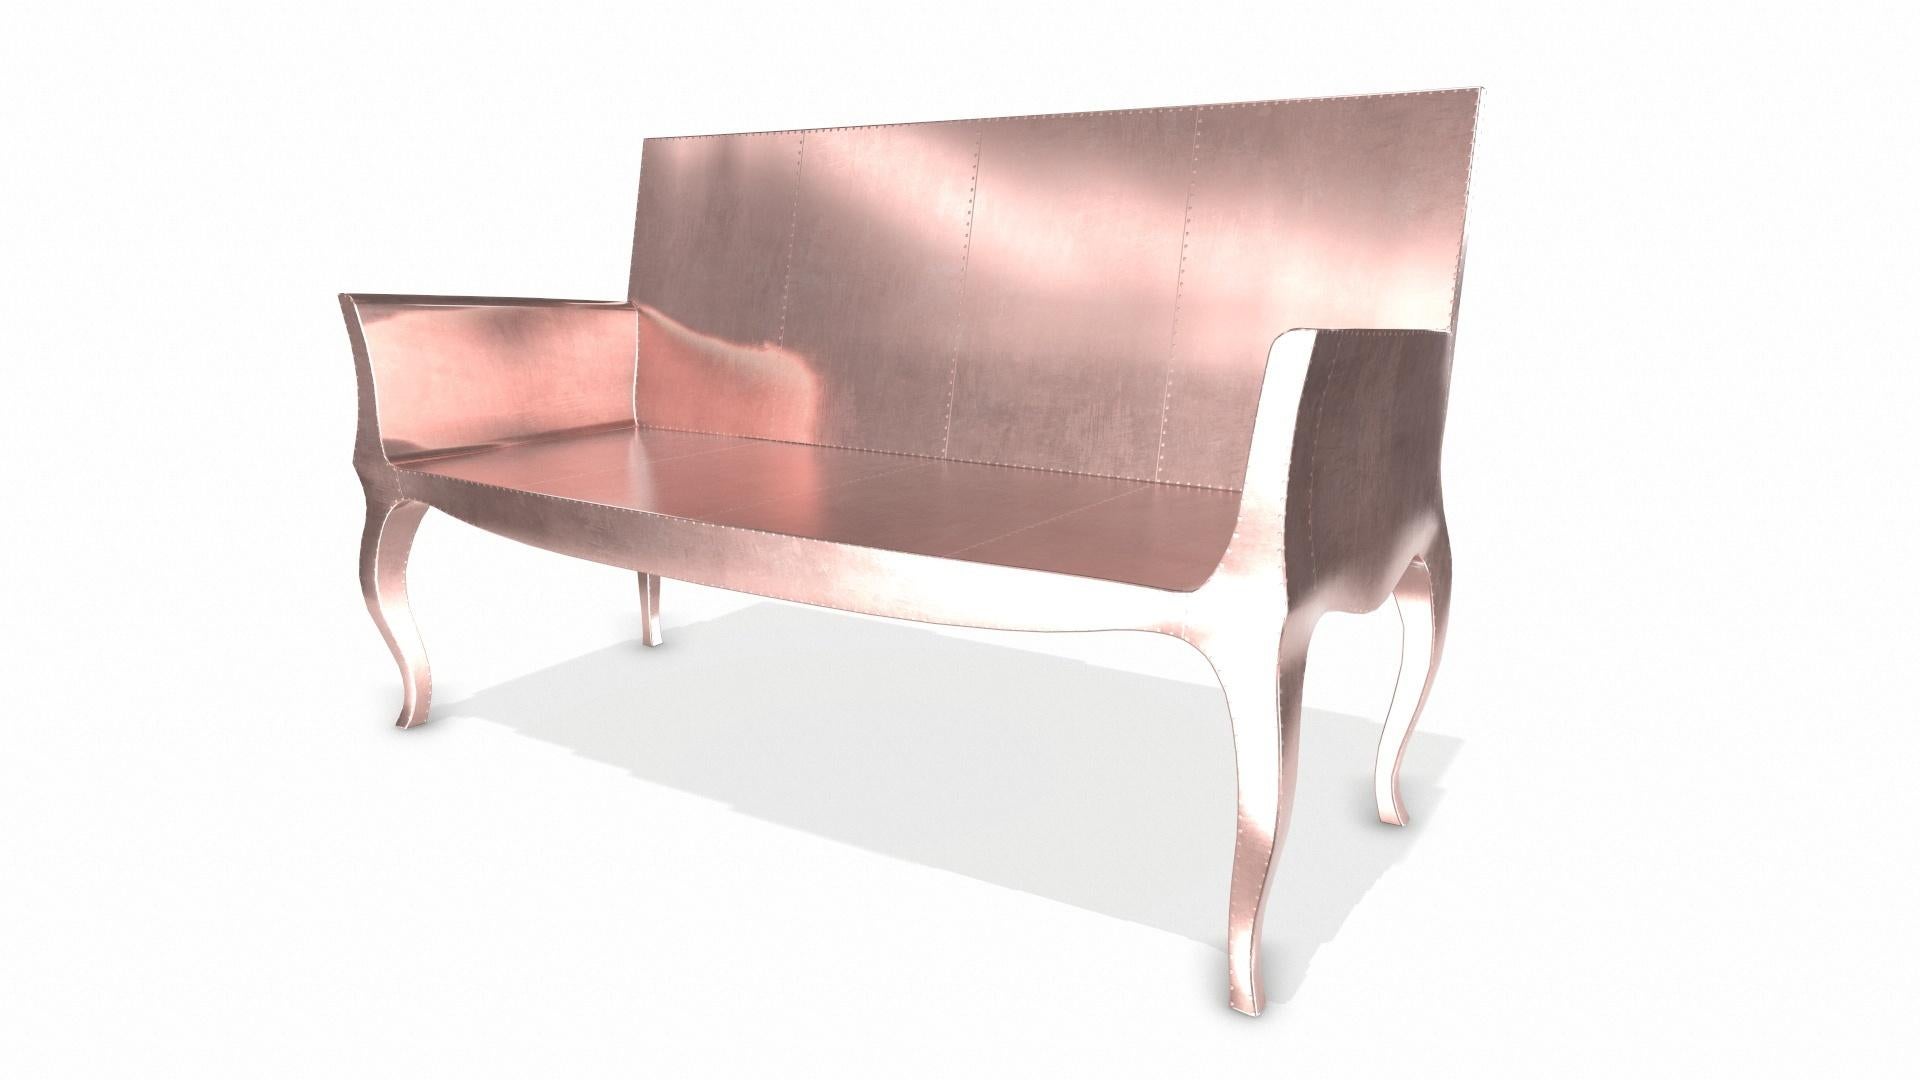 American Louise Settee Art Deco Chaise Longues in Smooth Copper by Paul Mathieu  For Sale